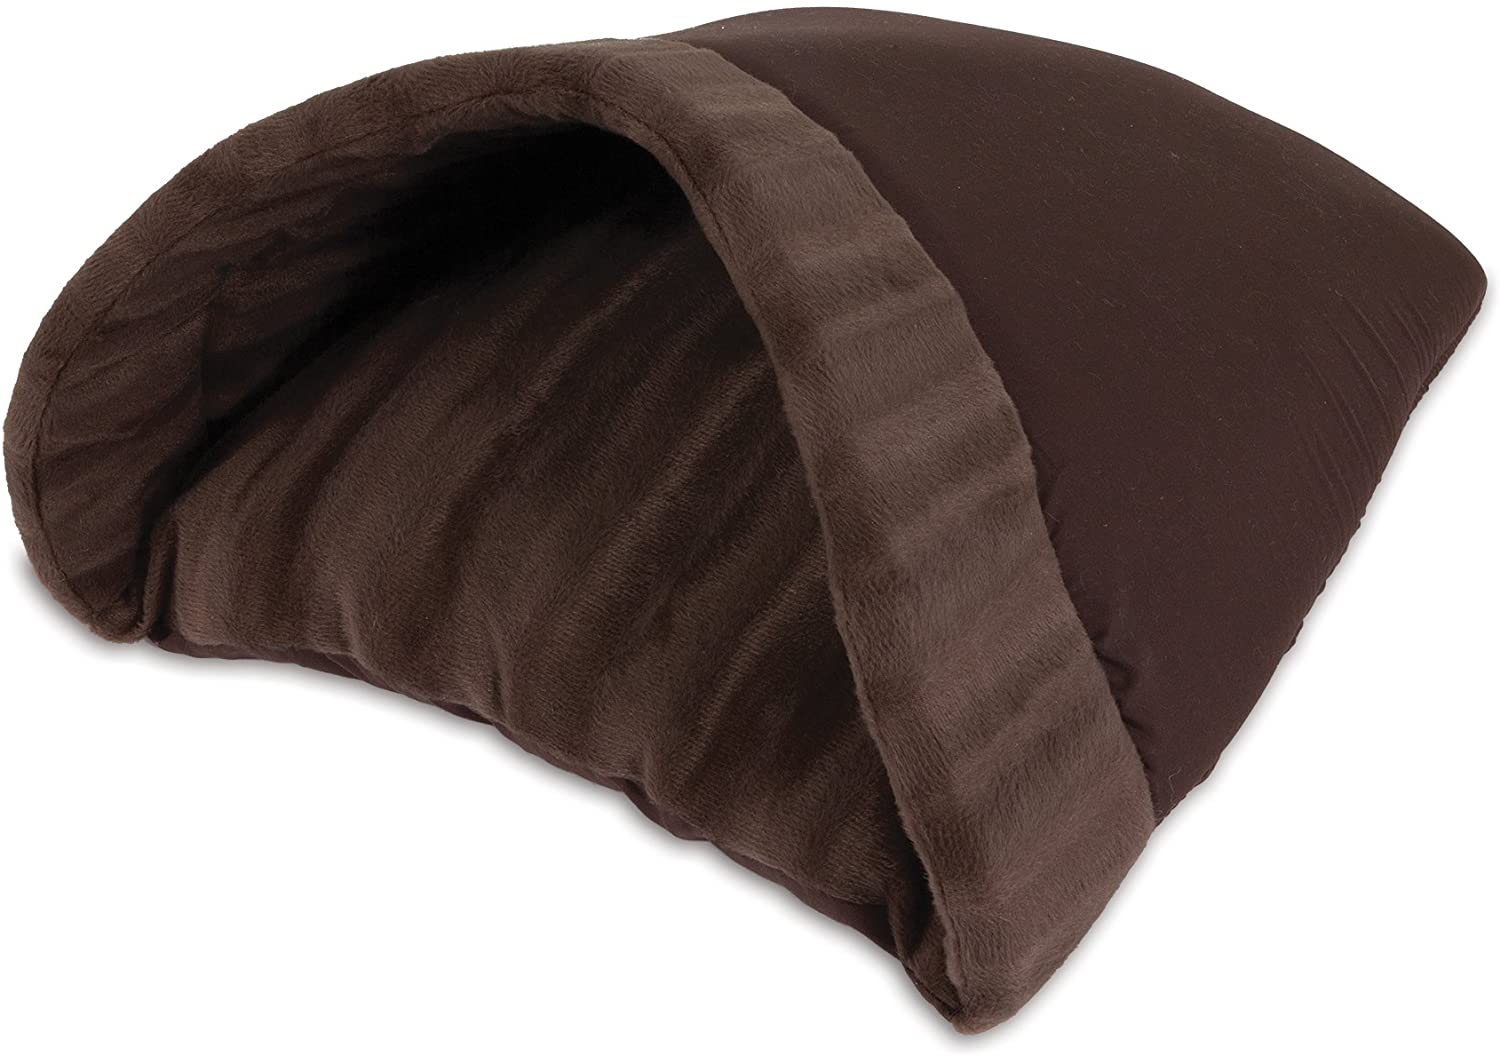 Kitty Cave, 16-Inch by 19-Inch, Chocolate Brown